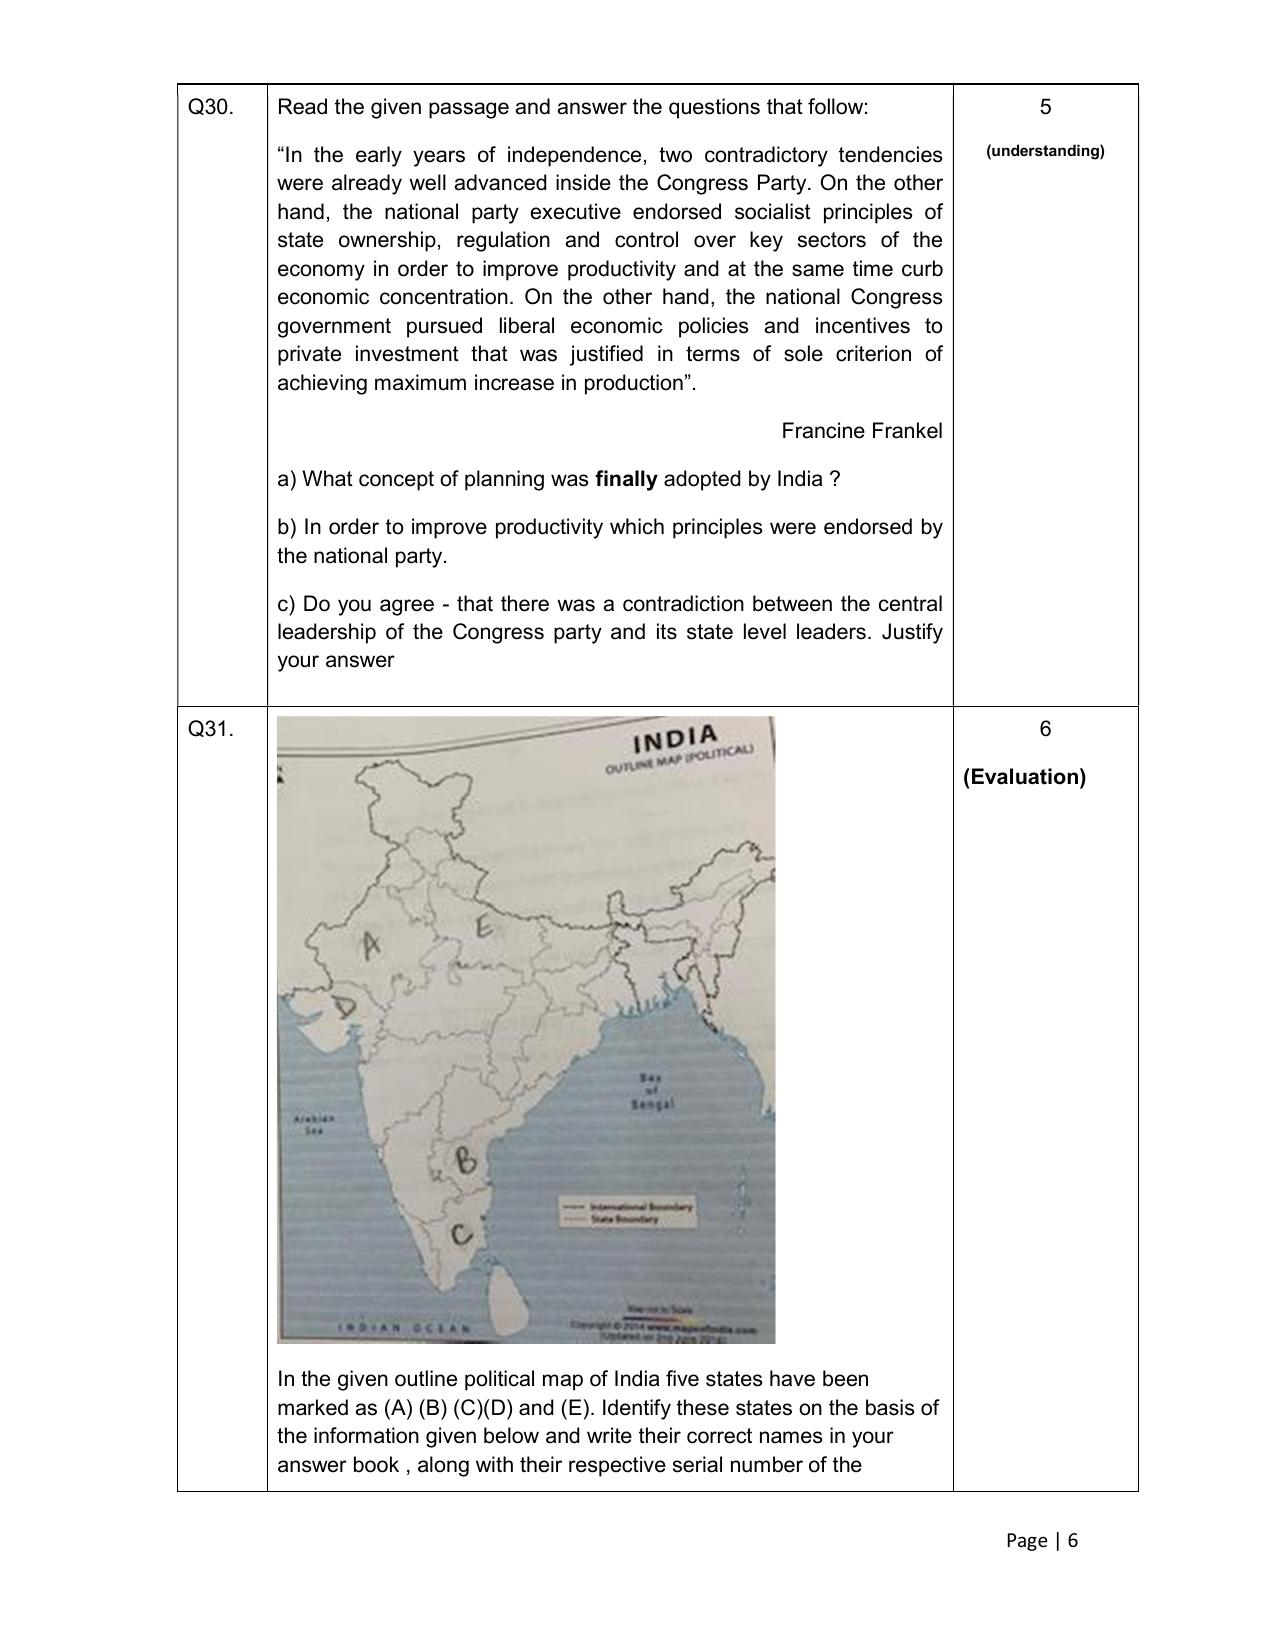 CBSE Class 12 Pol. Science -Sample Paper 2019-20 - Page 6